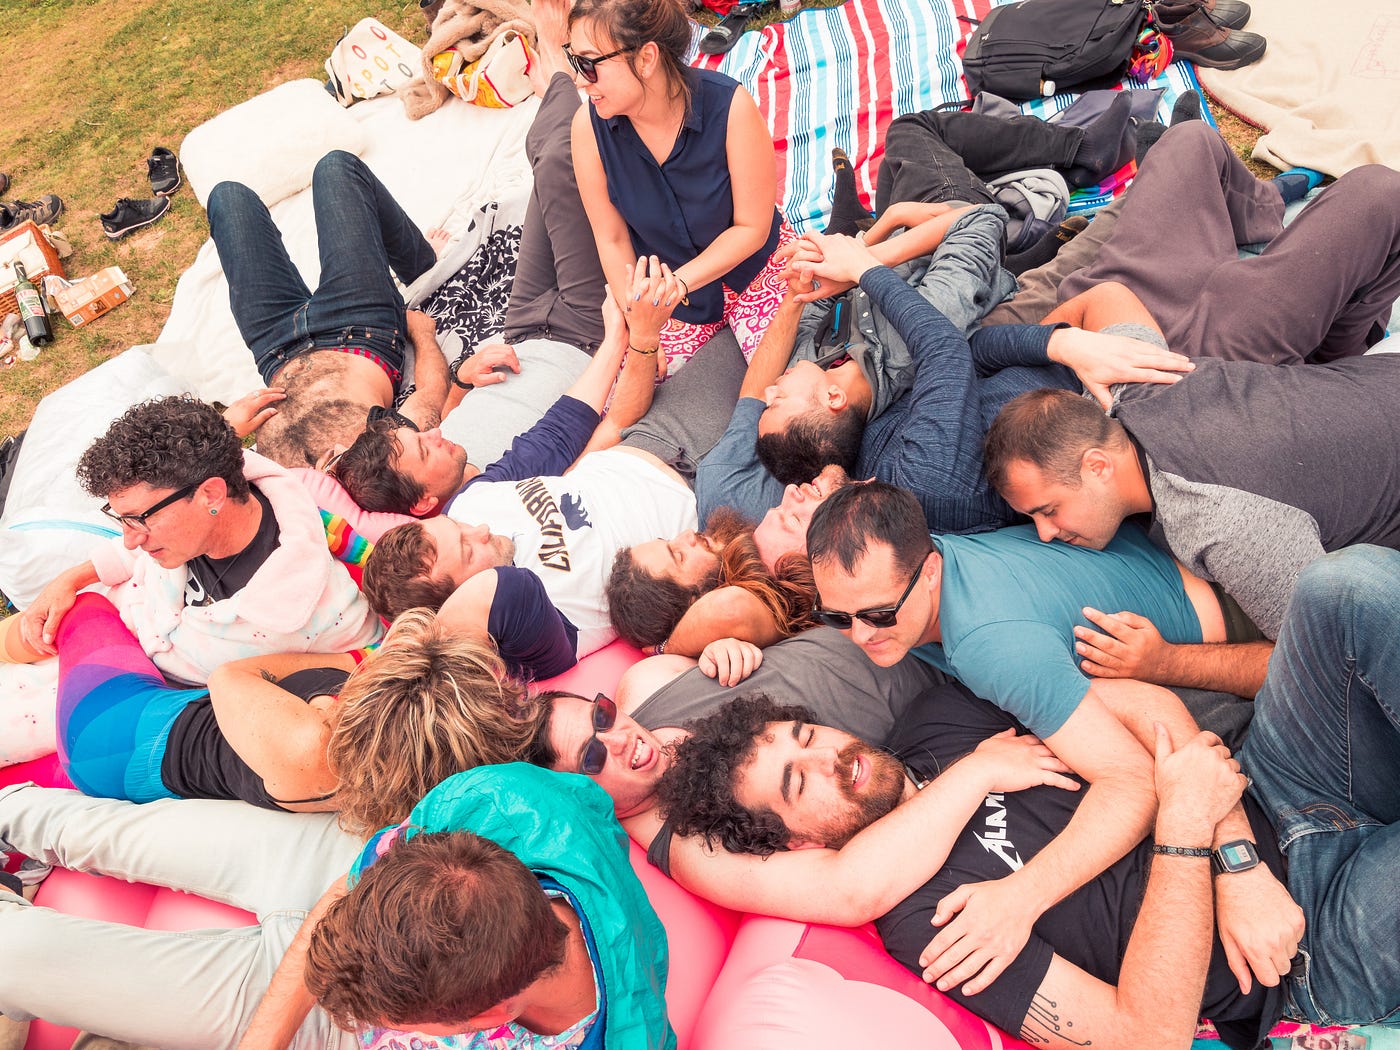 In Mission Dolores Park, an attempt to create the world's largest 'cuddle  puddle' | by Manny Merlot | Medium